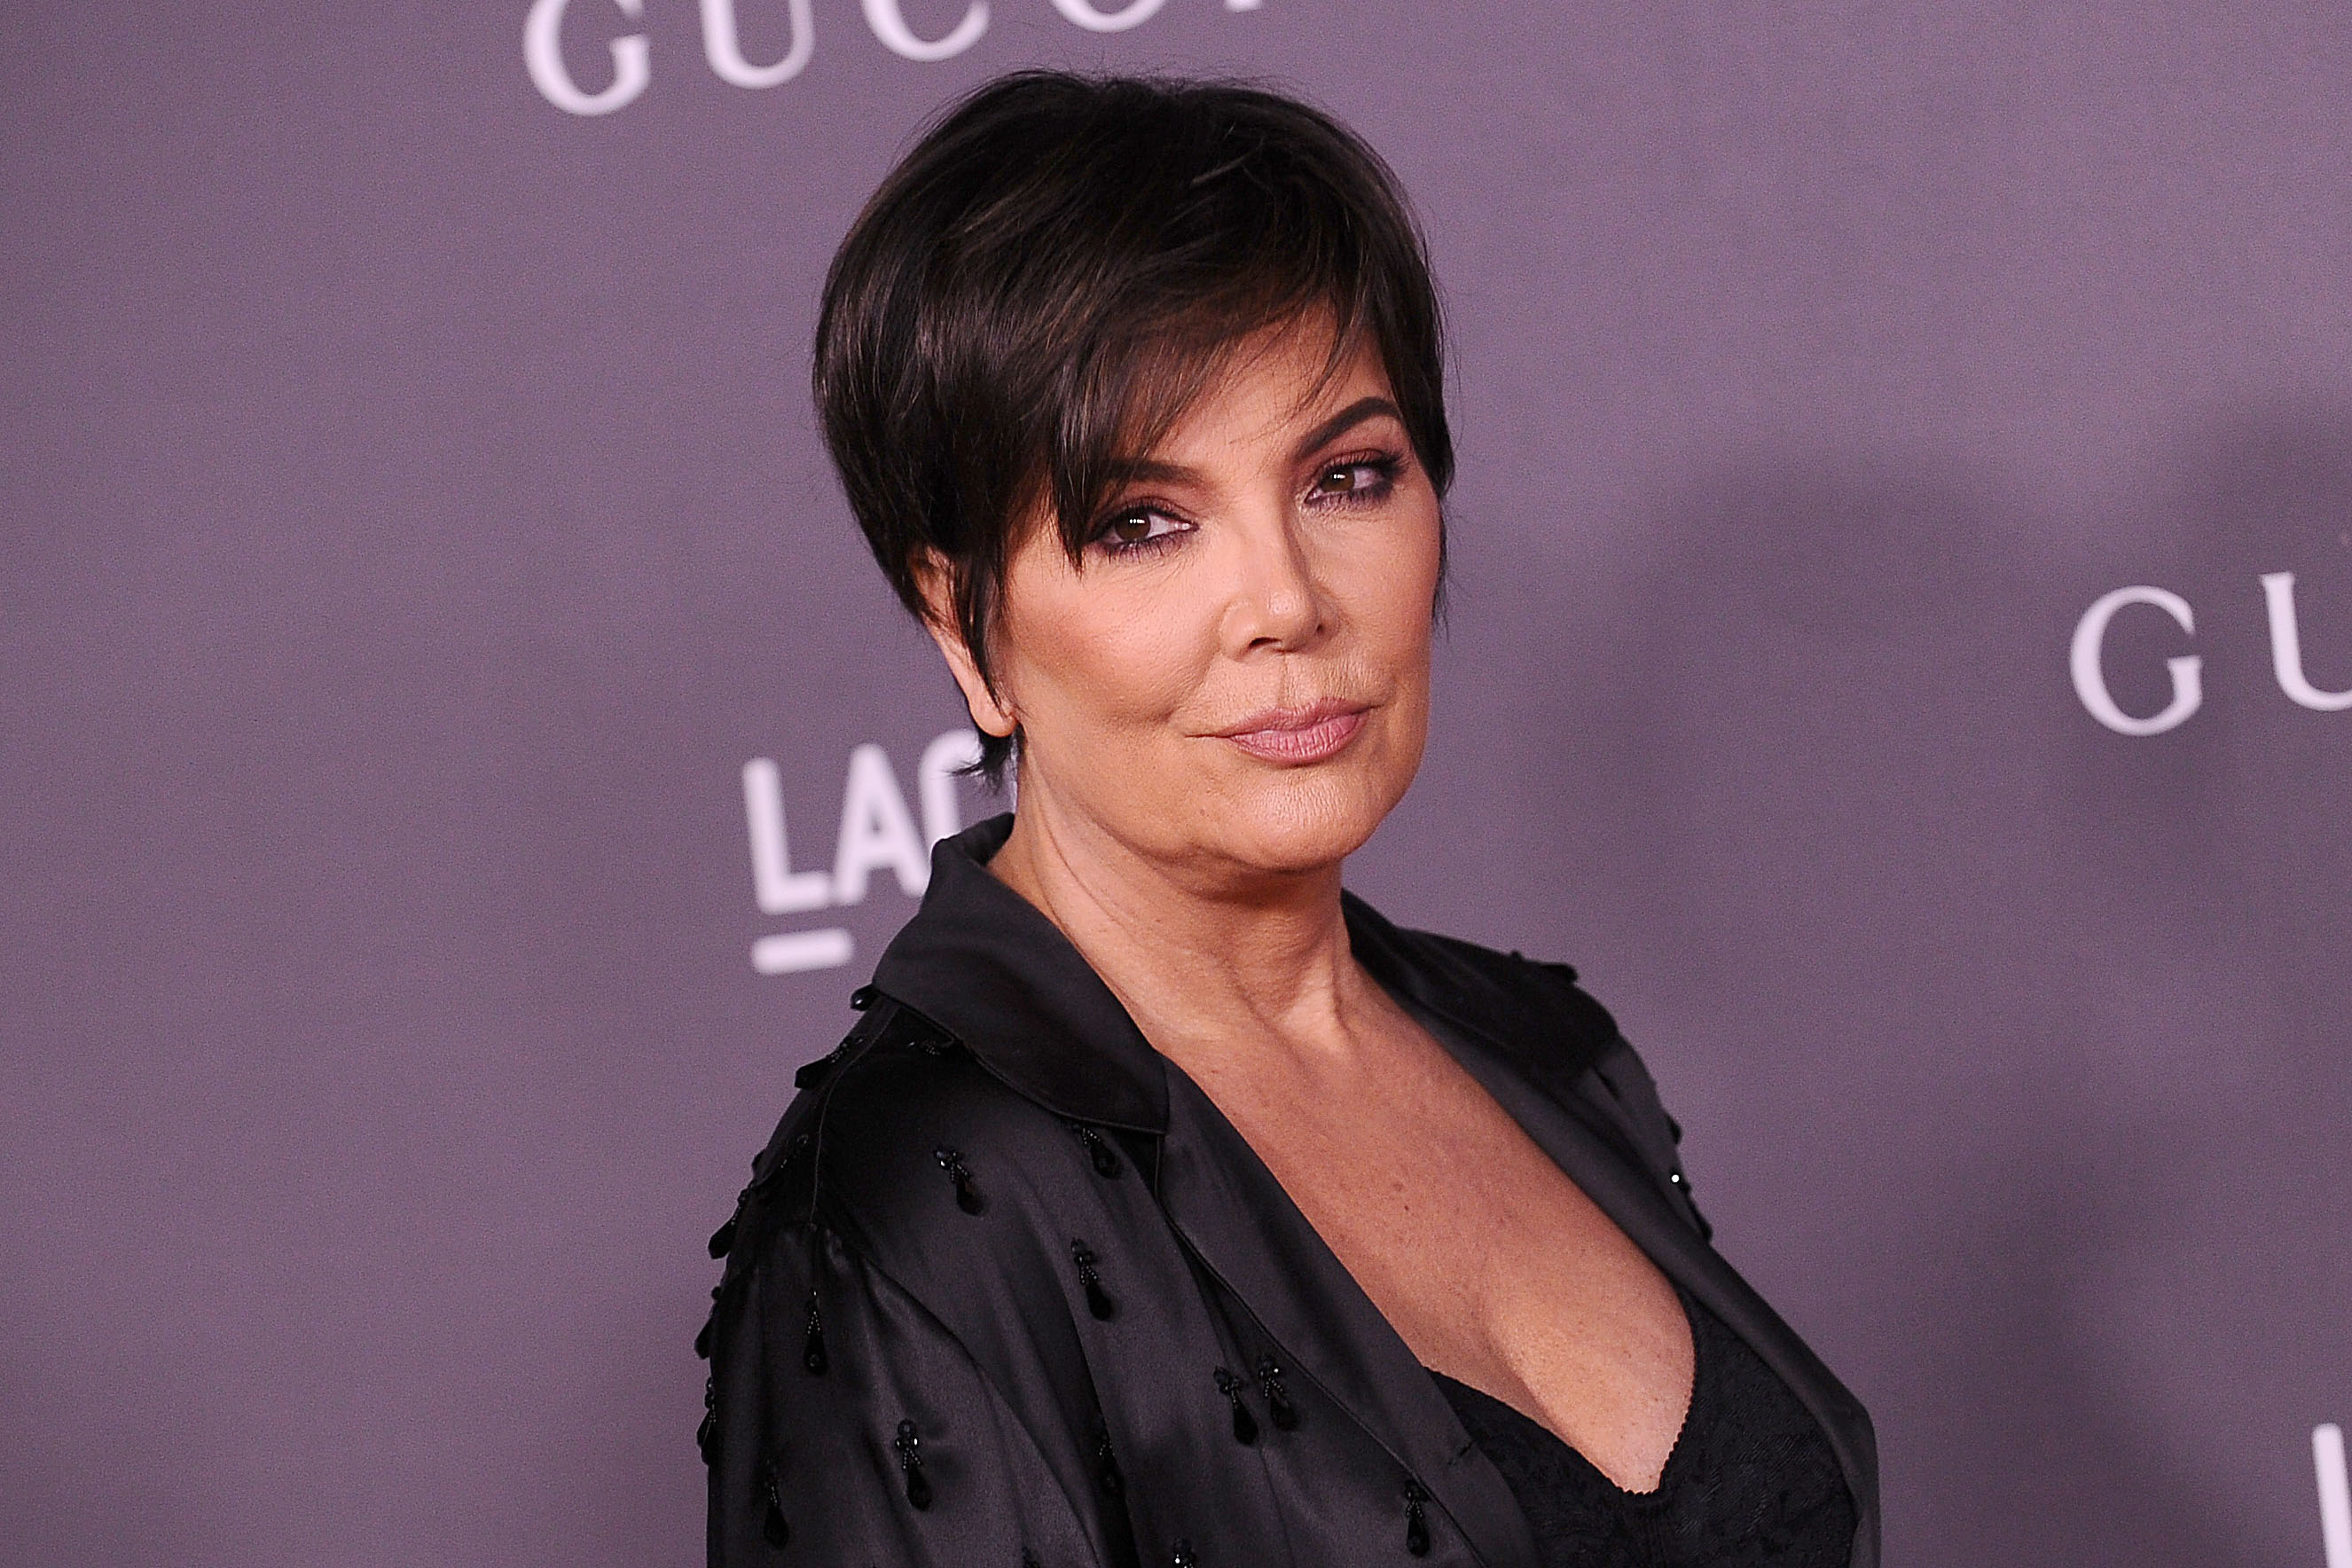 Knifed Up? Kris Jenner’s Face Looks A Lot Refreshed In New Selfie Bossip